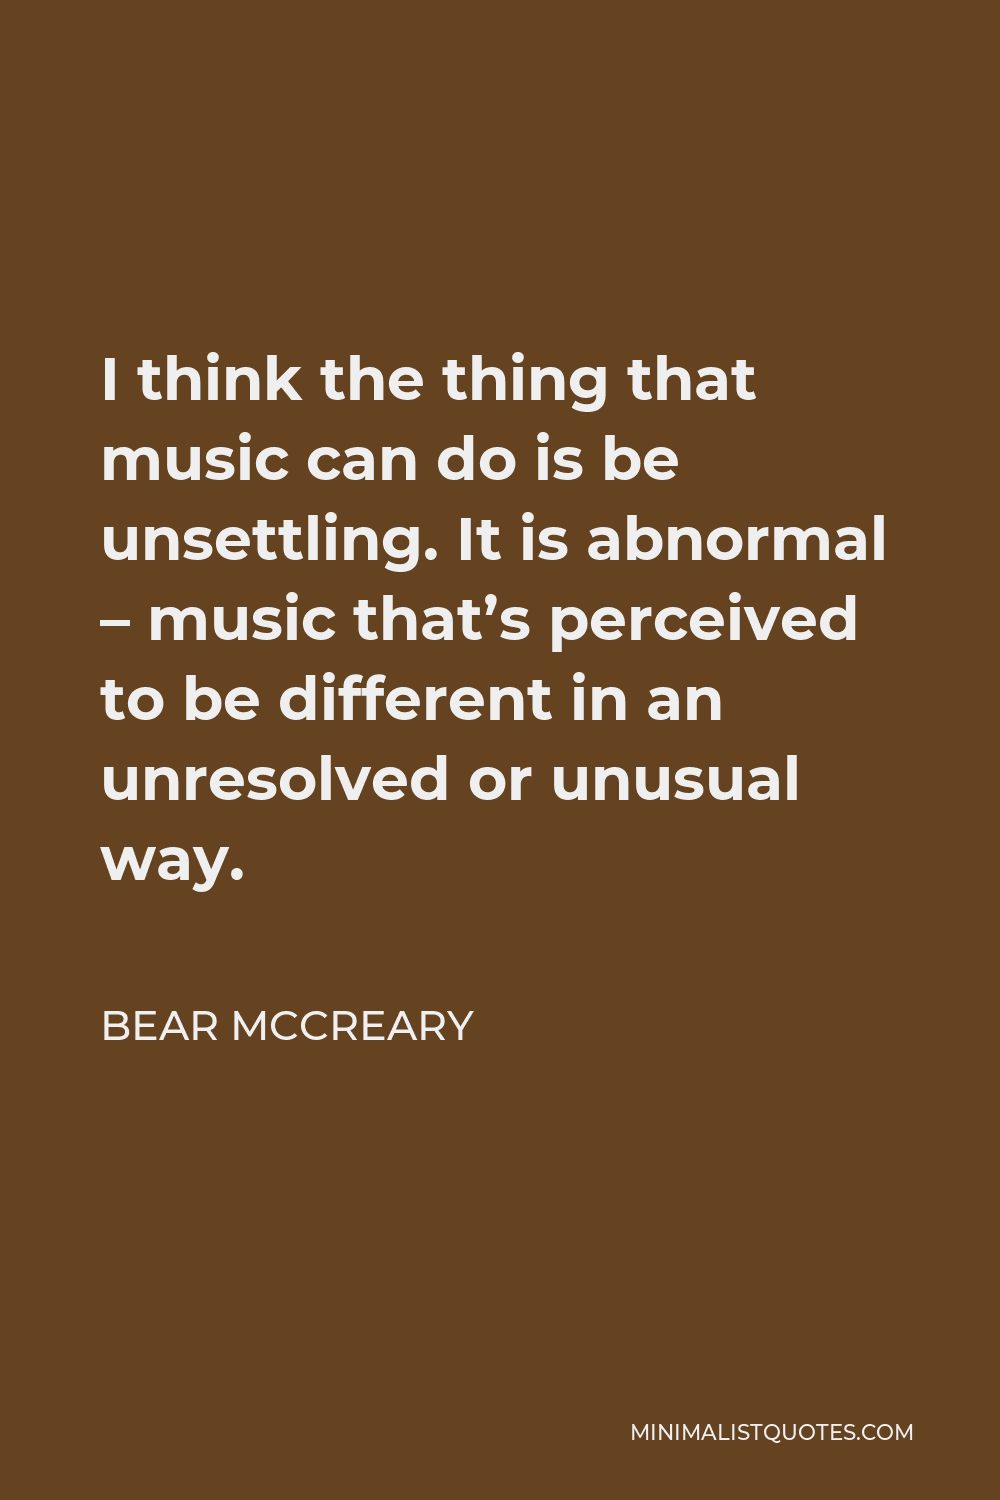 Bear McCreary Quote - I think the thing that music can do is be unsettling. It is abnormal – music that’s perceived to be different in an unresolved or unusual way.